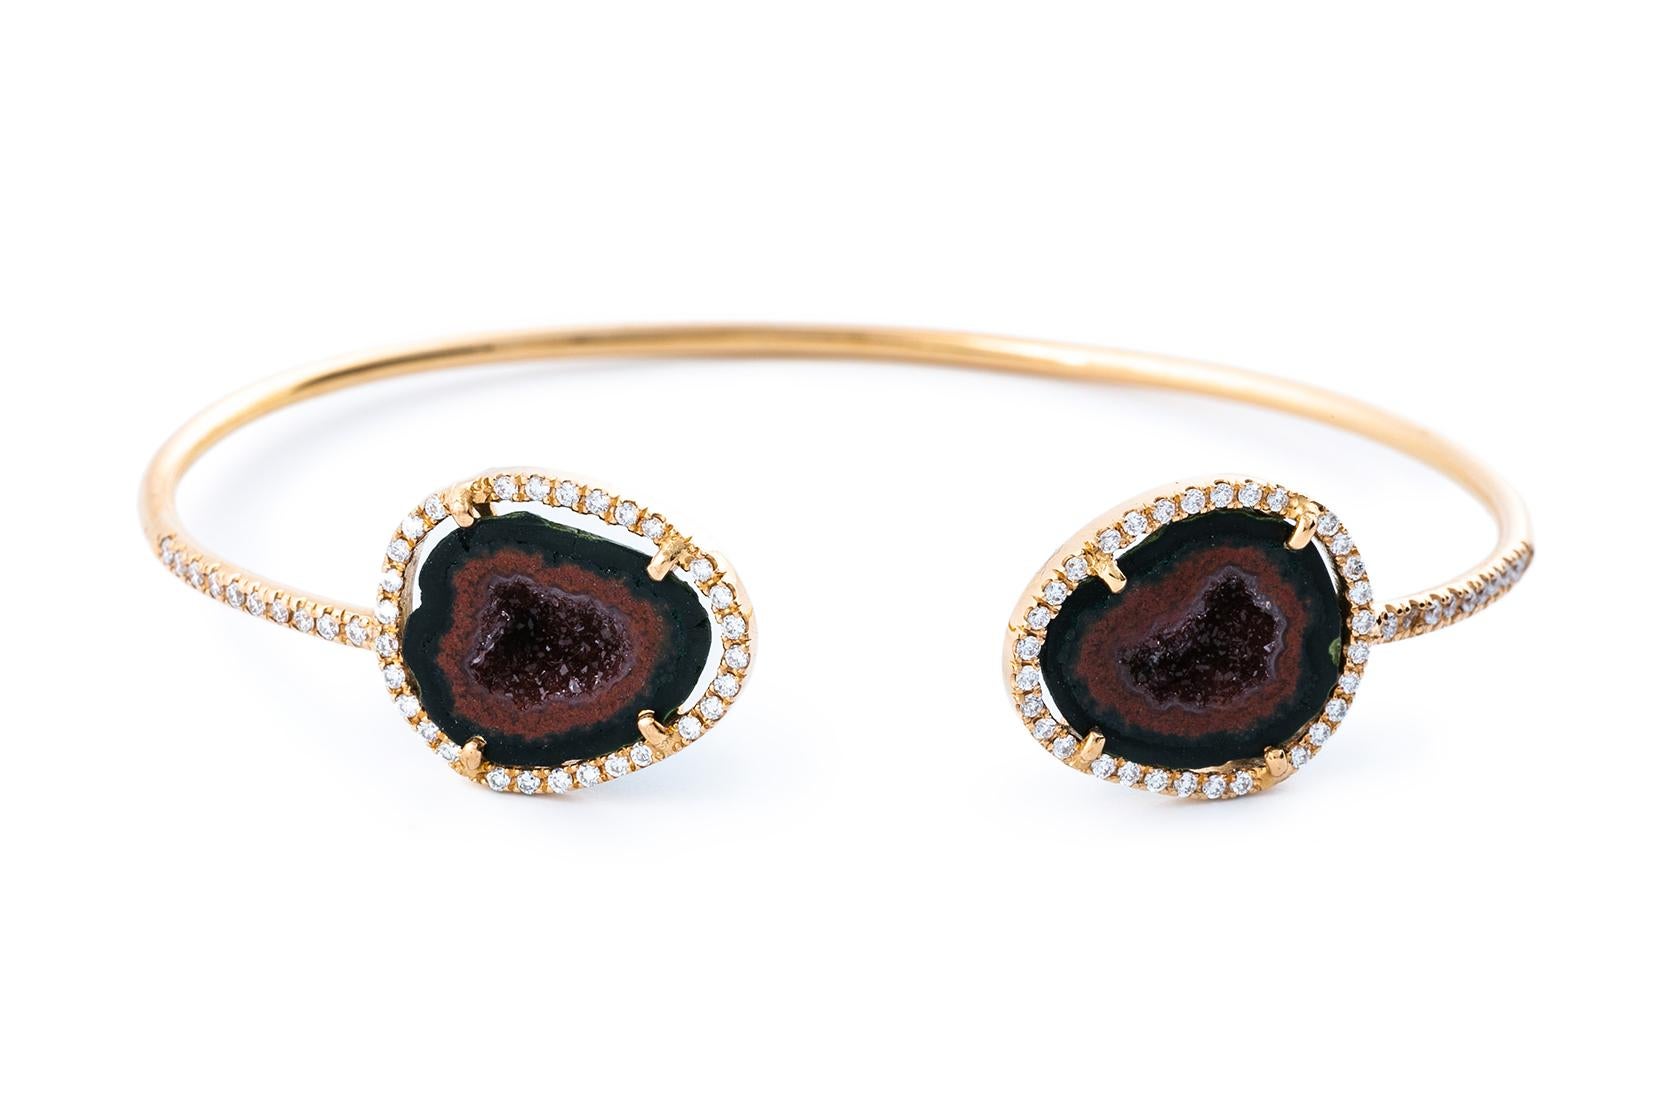 
The beautiful bordeaux colors of the agates come out even more with the shimmering of the 0.58 ct gvs white diamonds surrounding the stones.
We like the piece stacked with other bangles in different colors.
Perfectly for evenings or during the